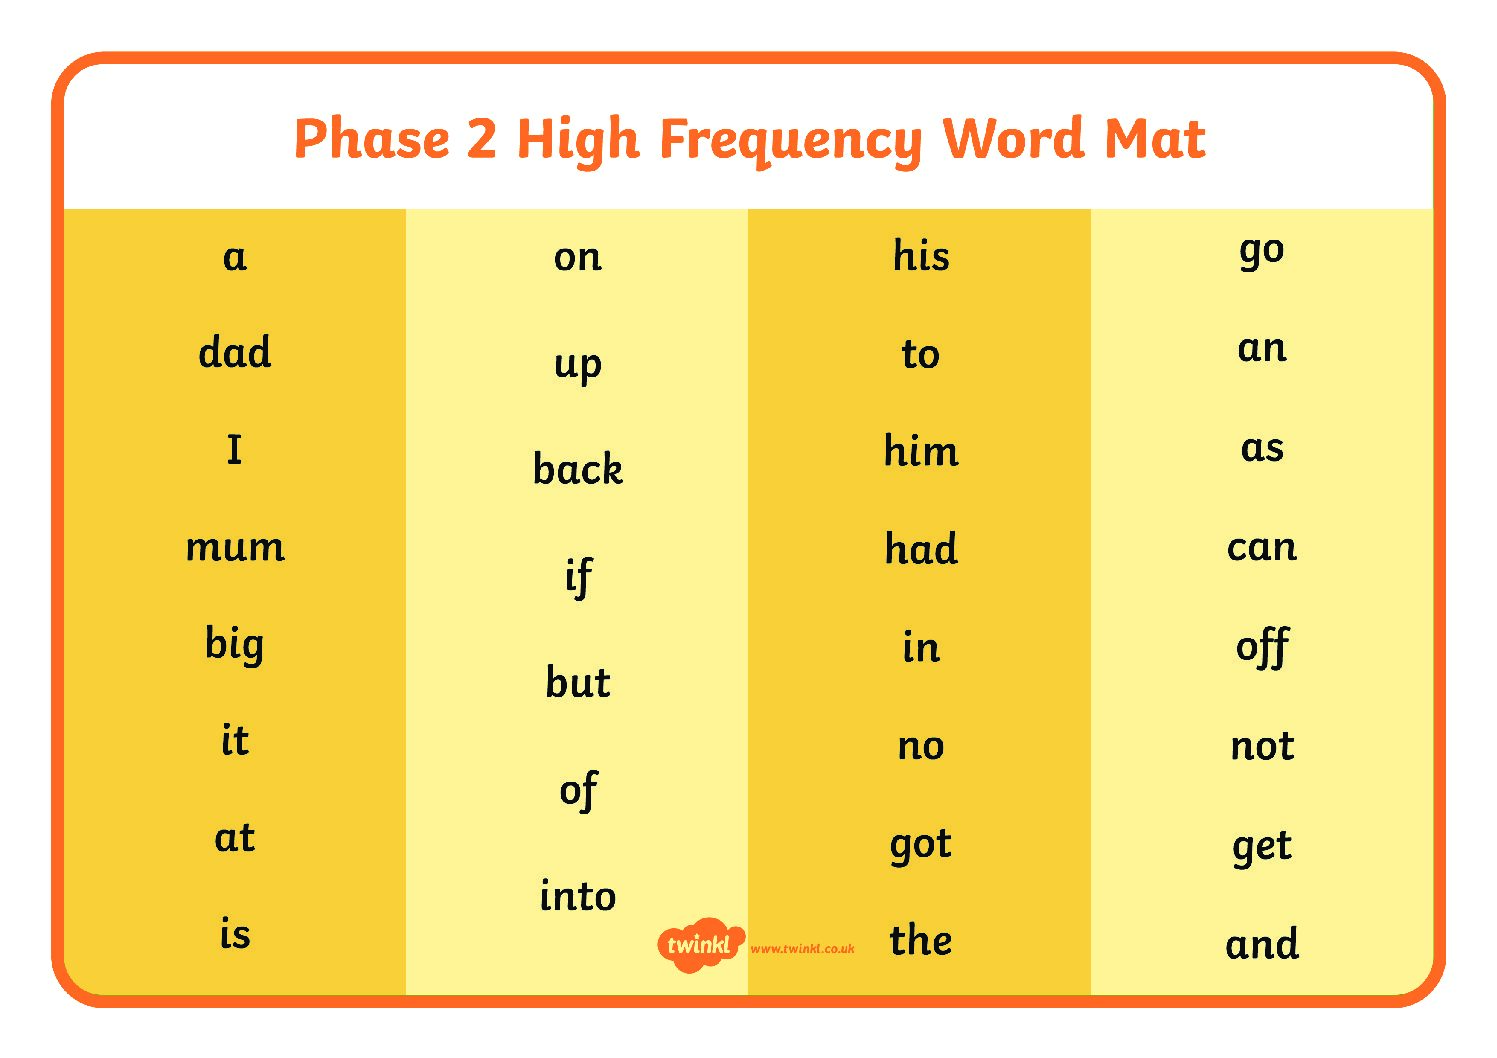 Frequency words. Words of Frequency. Phonics phase 2. High Frequency. High Frequency Words.